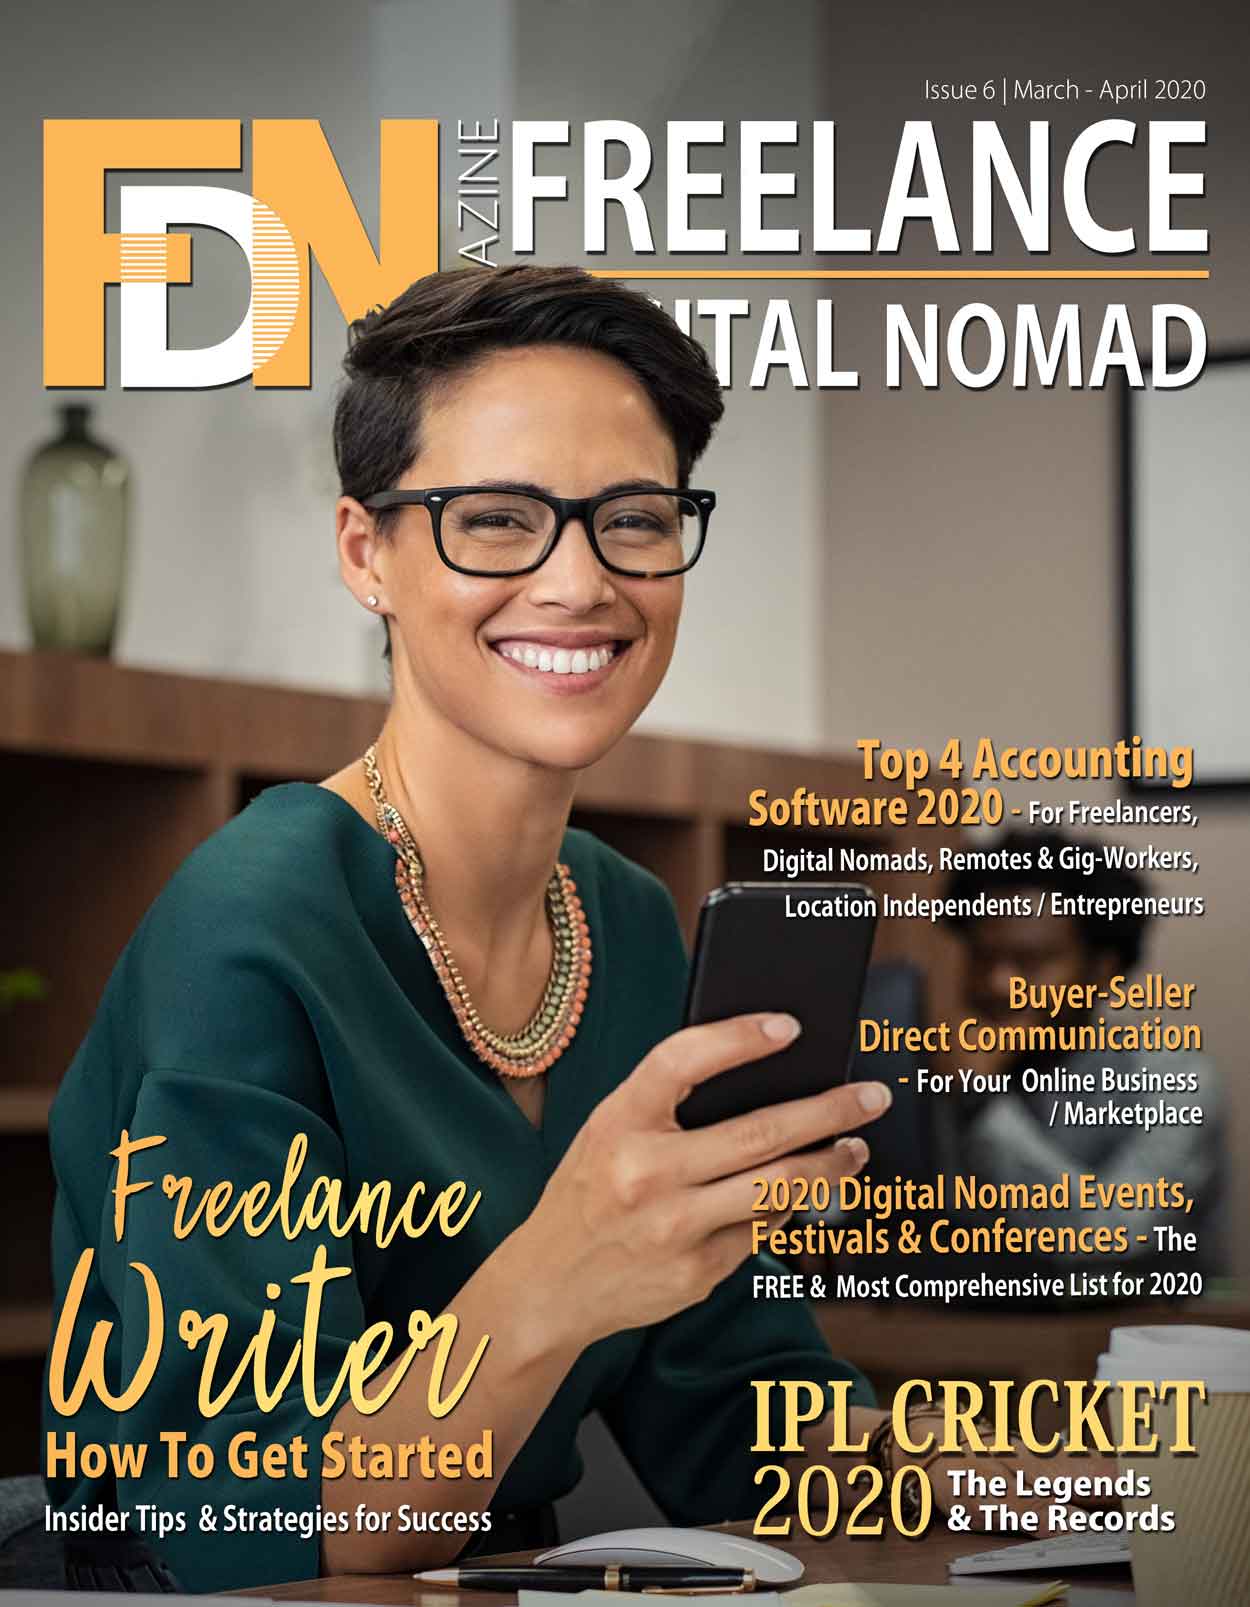 FDN Life Magazine - March - April 2020 Issue 6 - Magazine for Digital Nomads, Freelancers, Remotes, Gig-Workers and Location Independents